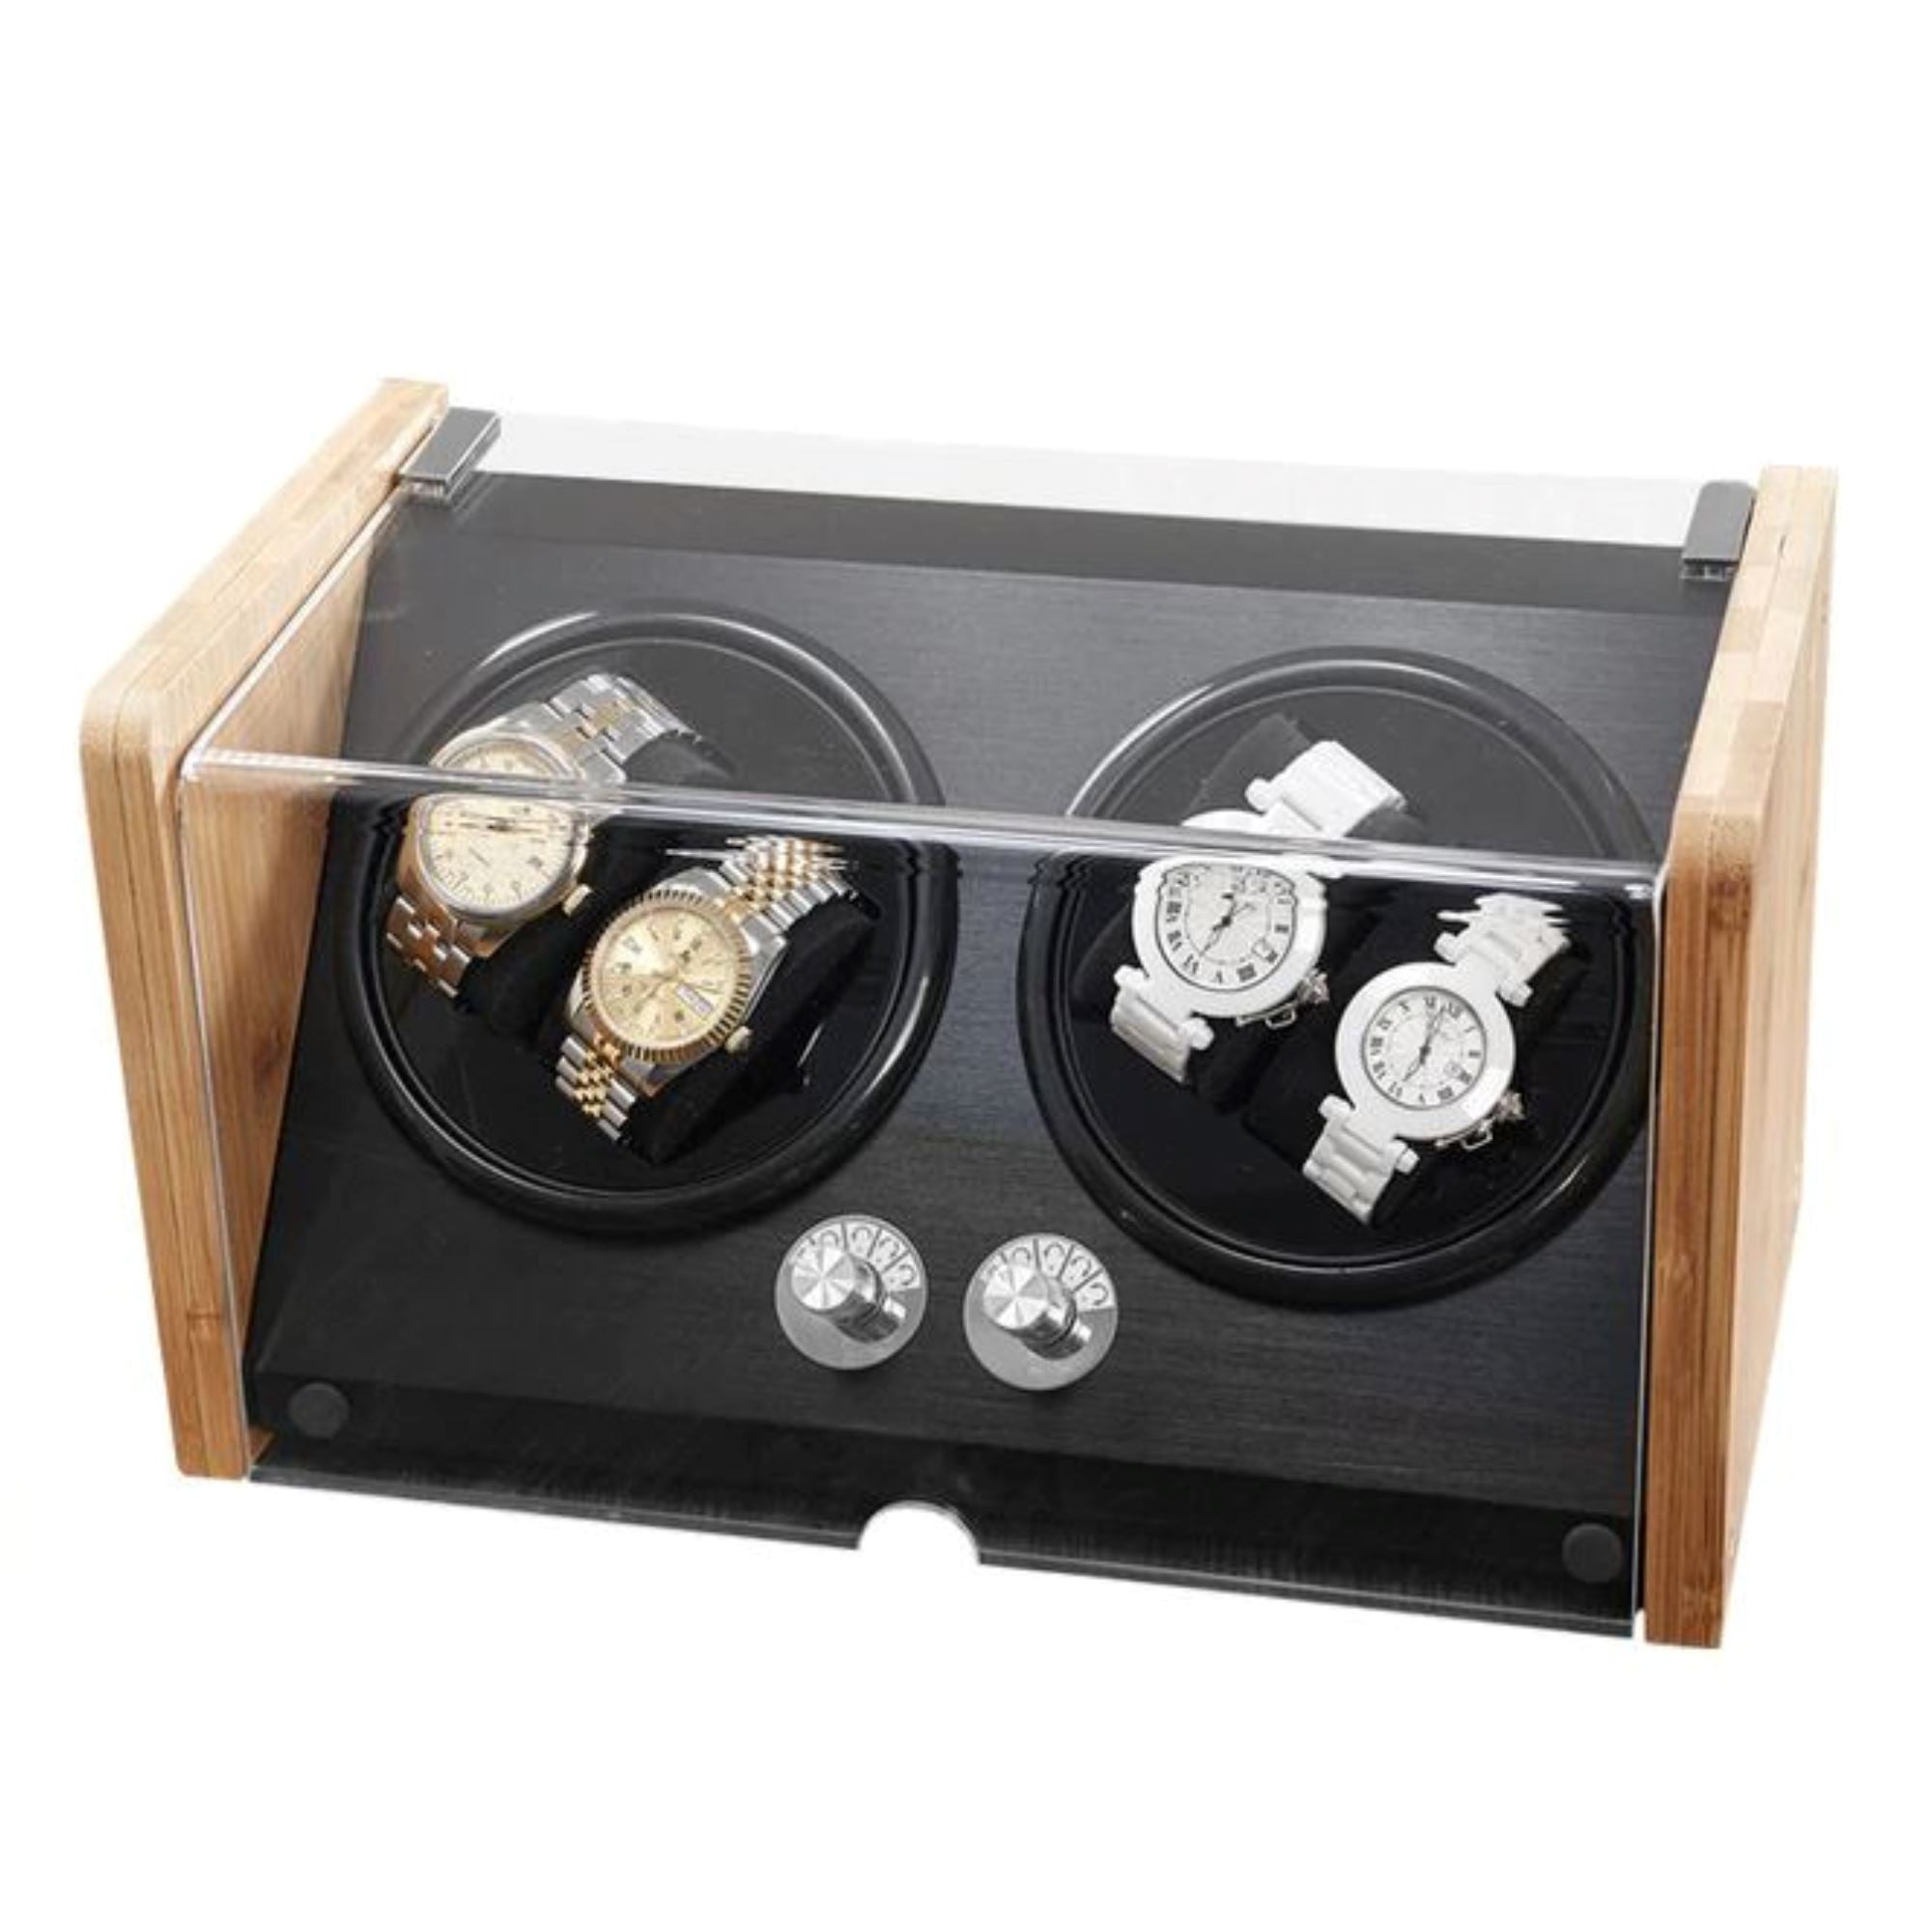 BLAQ Bamboo/Black Watch Winder Box for 4 Watches Watch Winder Boxes Clinks 